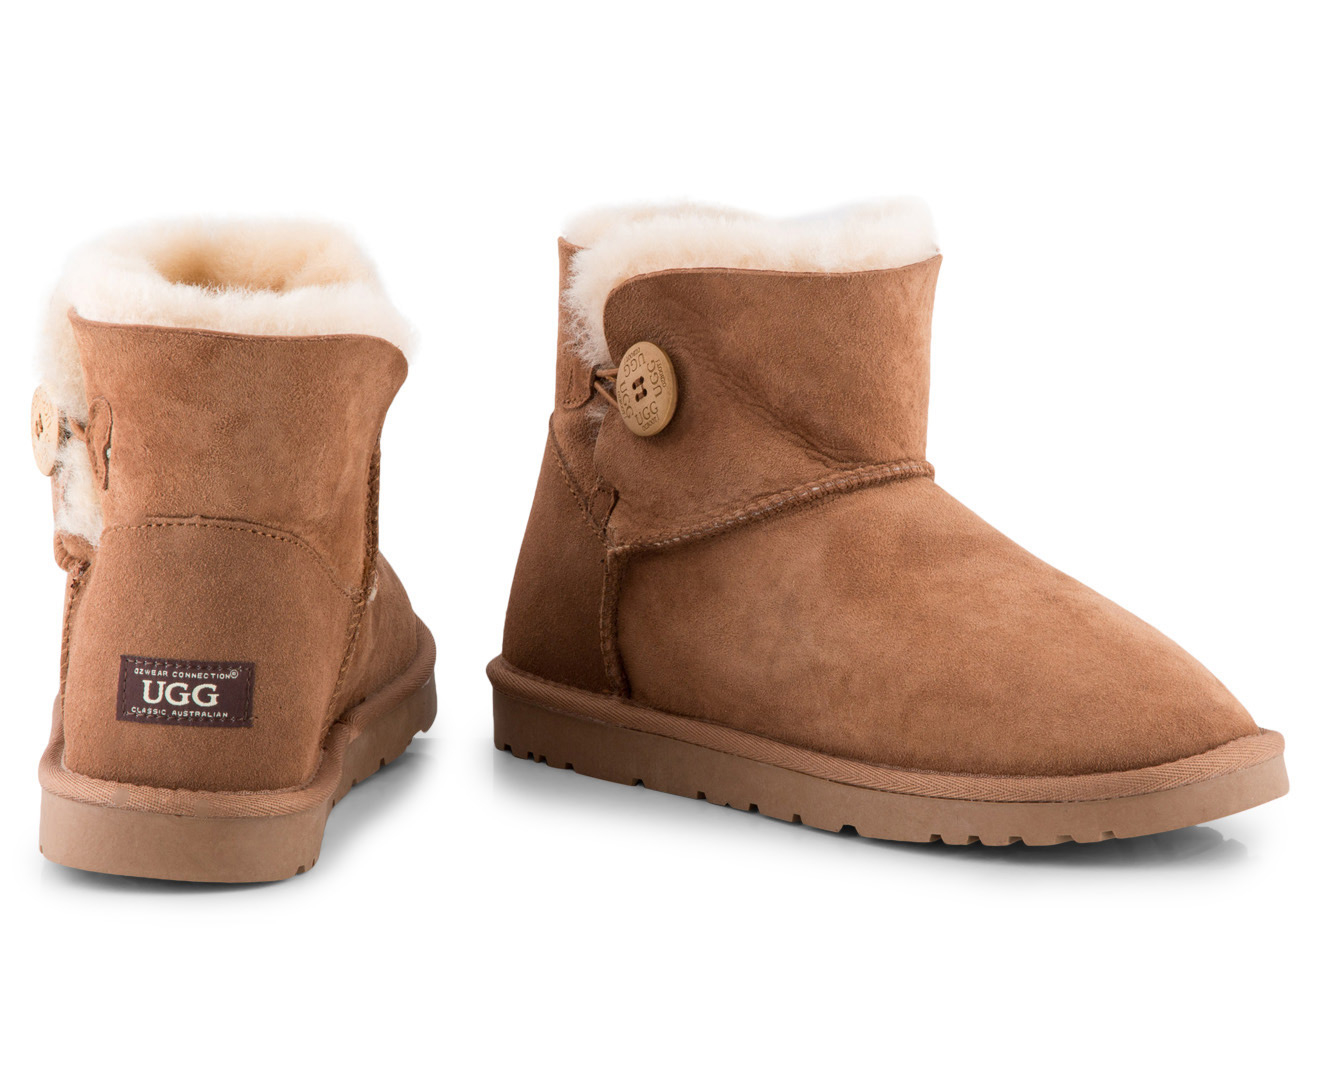 OZWEAR Connection Ugg Mini Button Boot - Chestnut